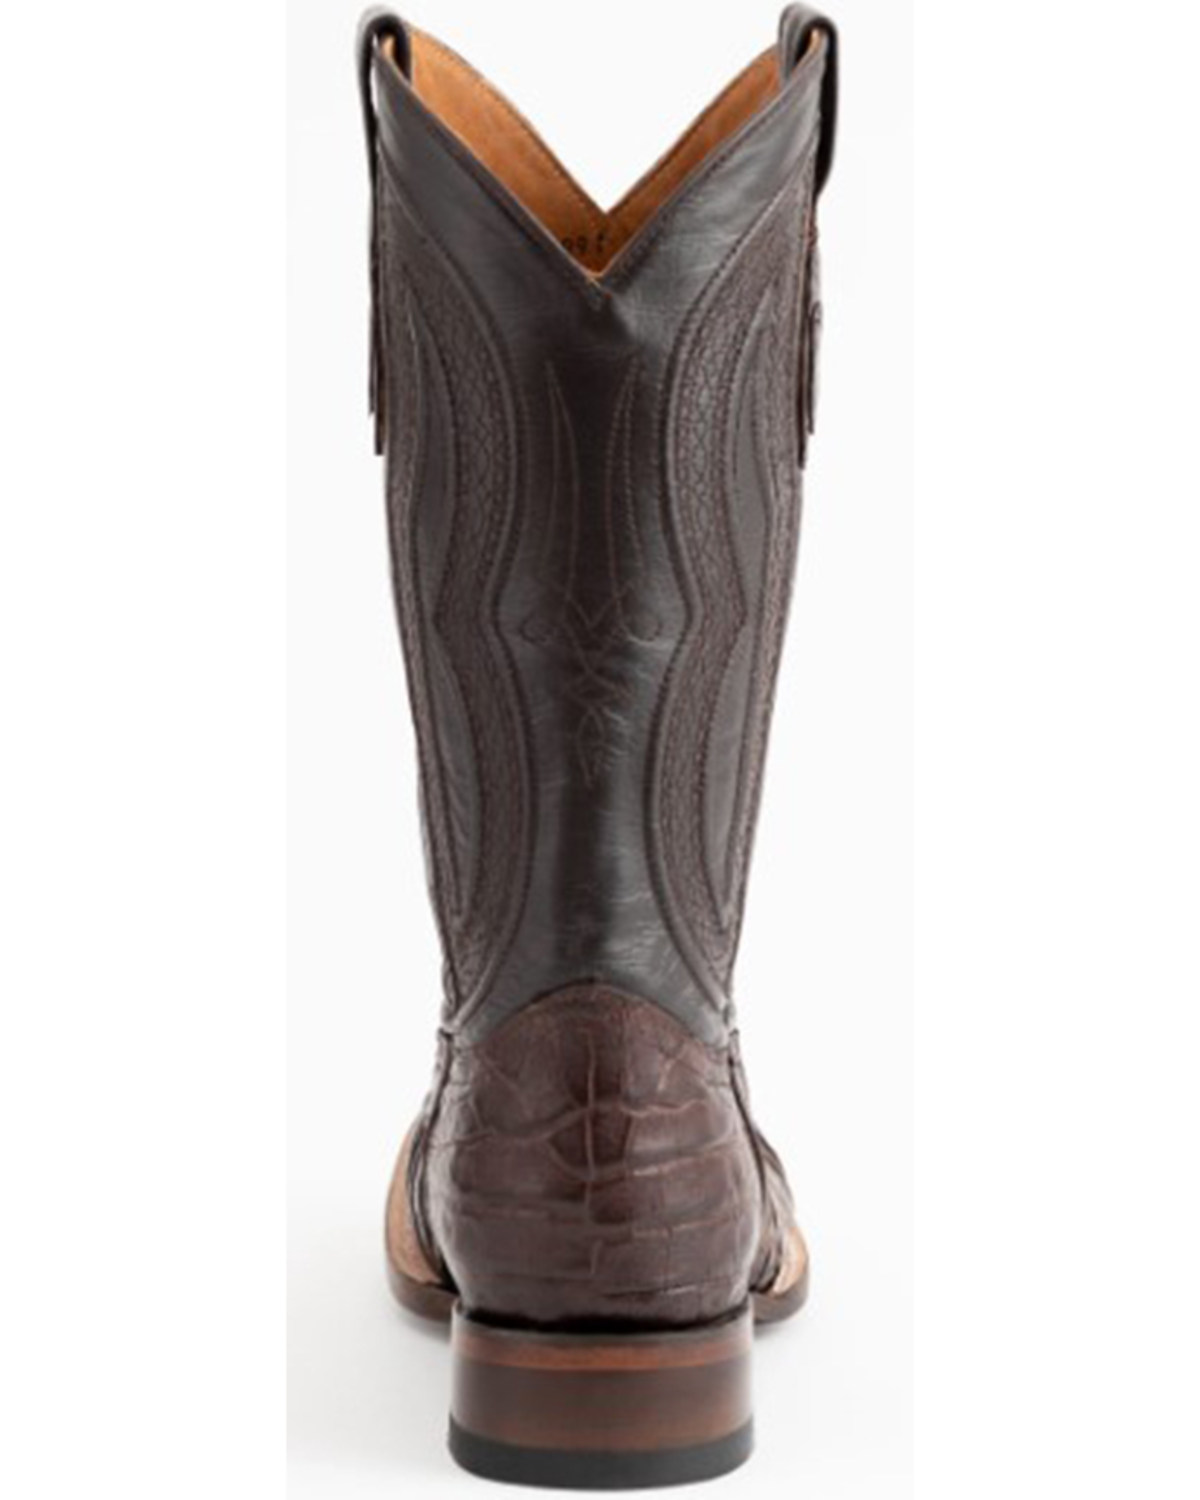 Ferrini  Mens Belly Caiman Chocolate Square Toe   Western Cowboy Boots   Mid Calf - image 5 of 7